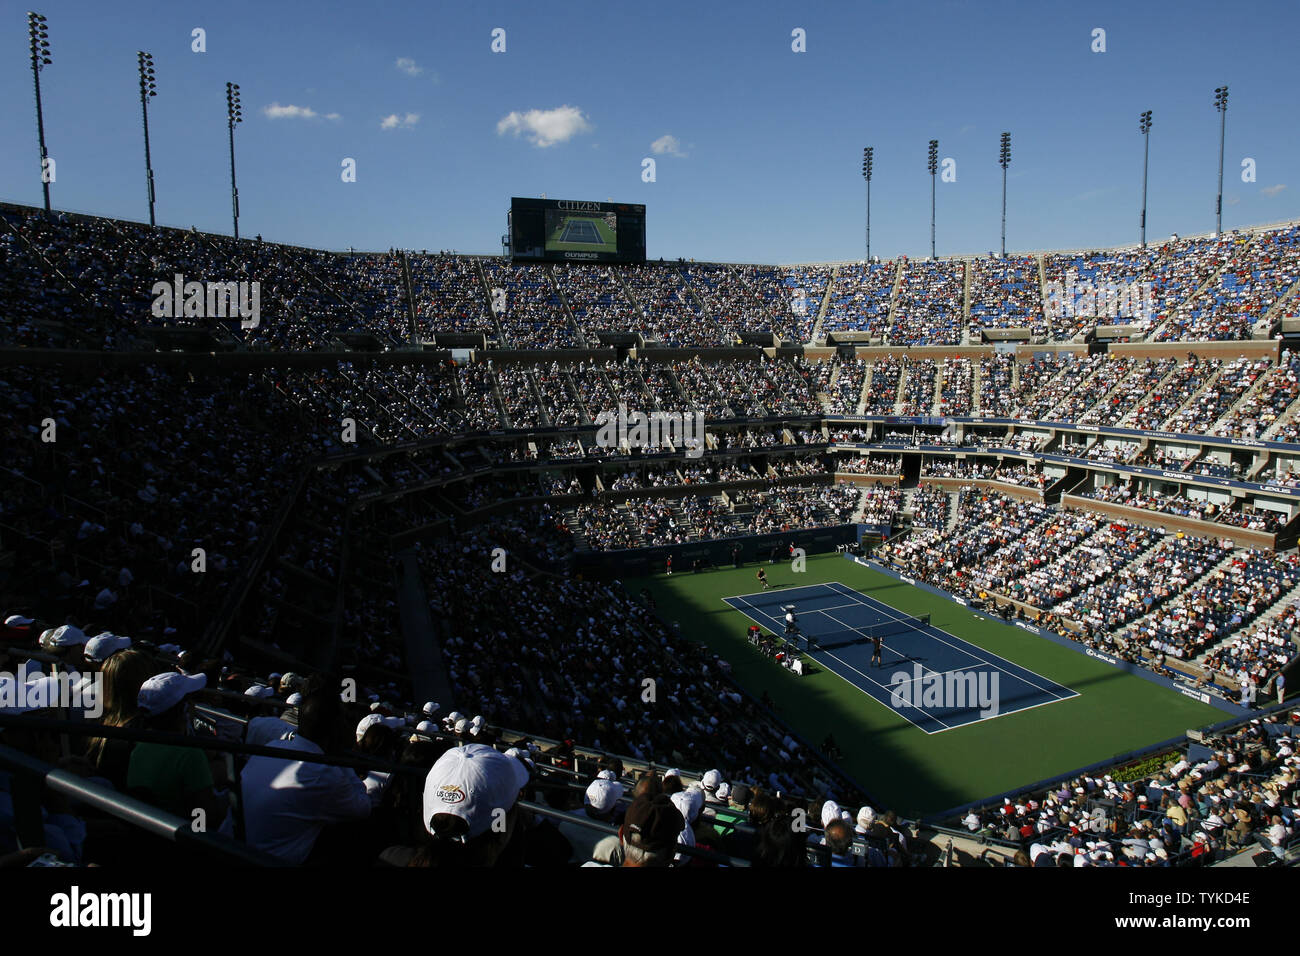 The sun casts shadow on the spectators as Roger Federer of Switzerland plays Juan Martin Del Potro of Argentina in the first set of their mens final match in Arthur Ashe Stadium at the US Open Tennis Championships at the Billie Jean King National Tennis Center in New York on September 14, 2009.     UPI/John Angelillo Stock Photo